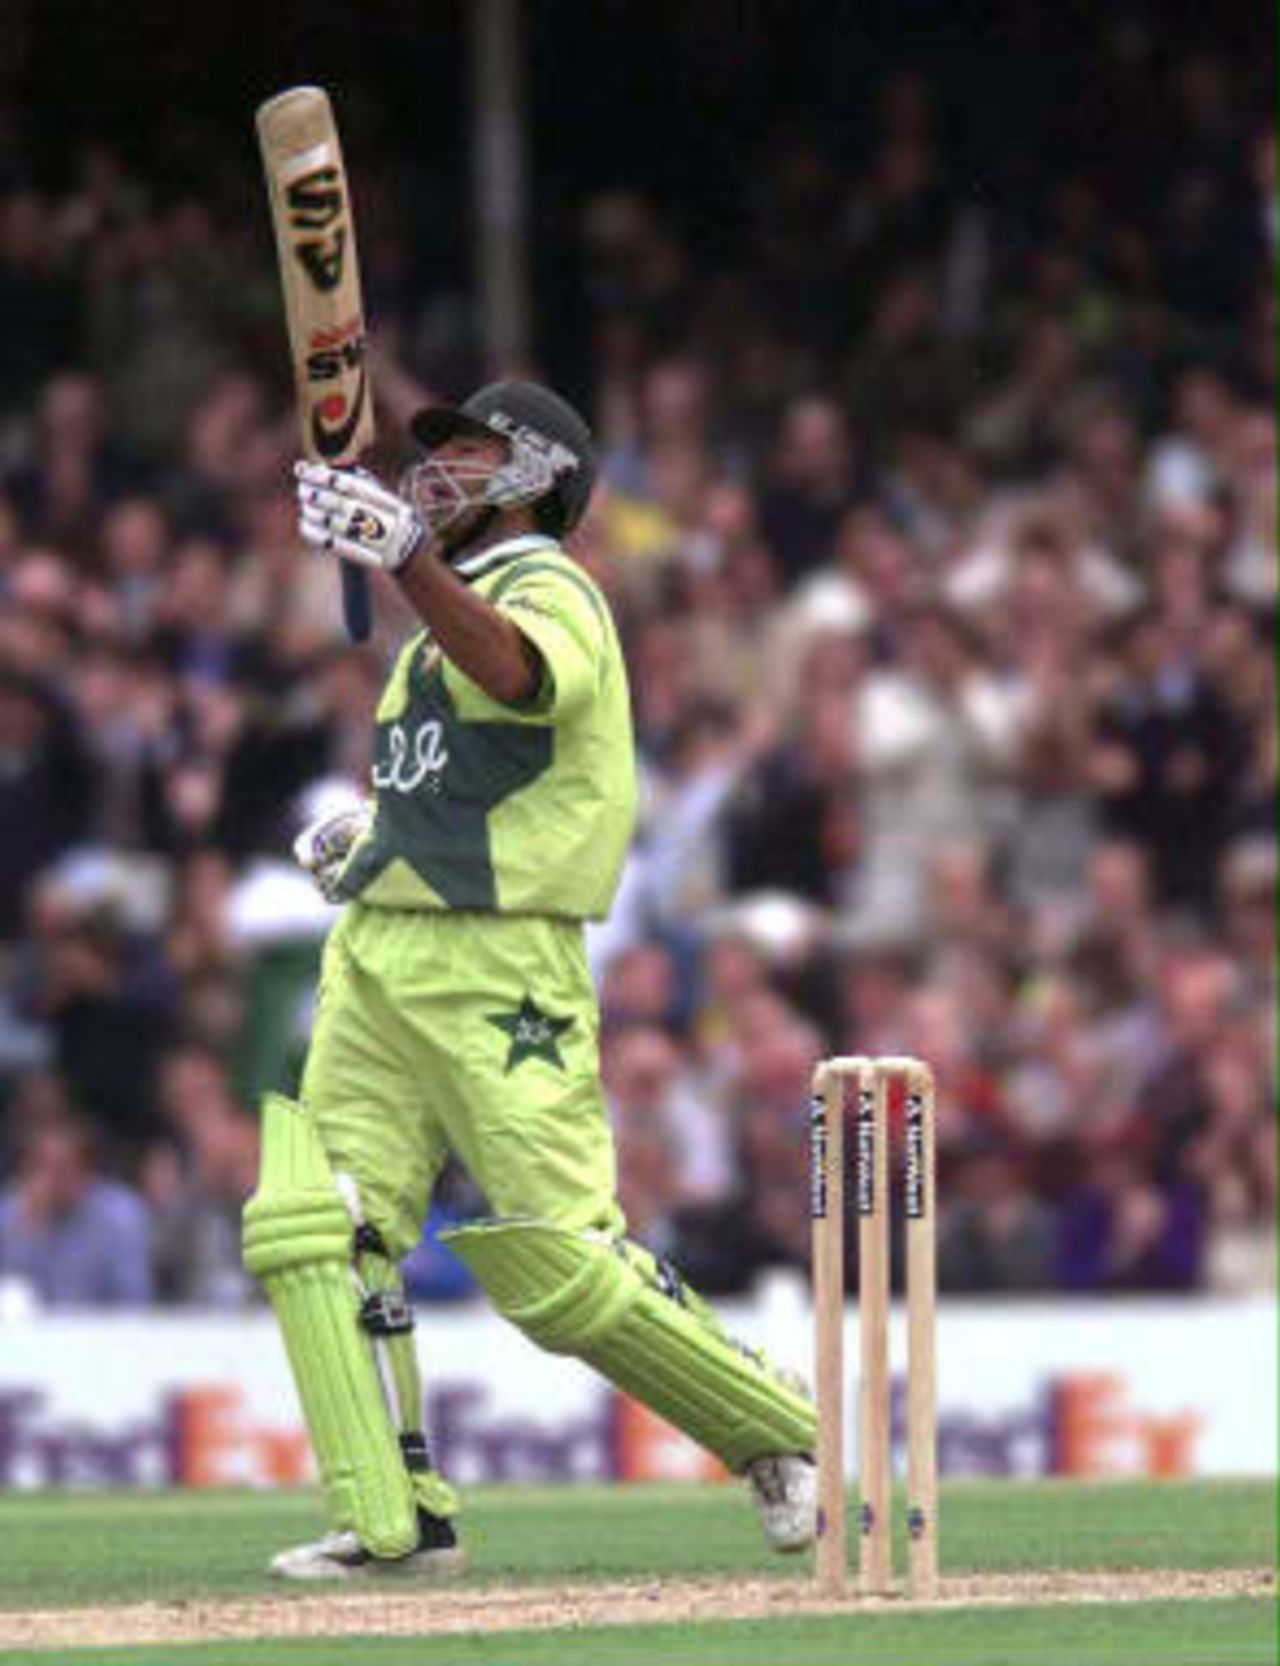 Pakistan opening batsman Saeed Anwar celebrates his century against Zimbabwe, during WC99 Super Six match at The Oval in London